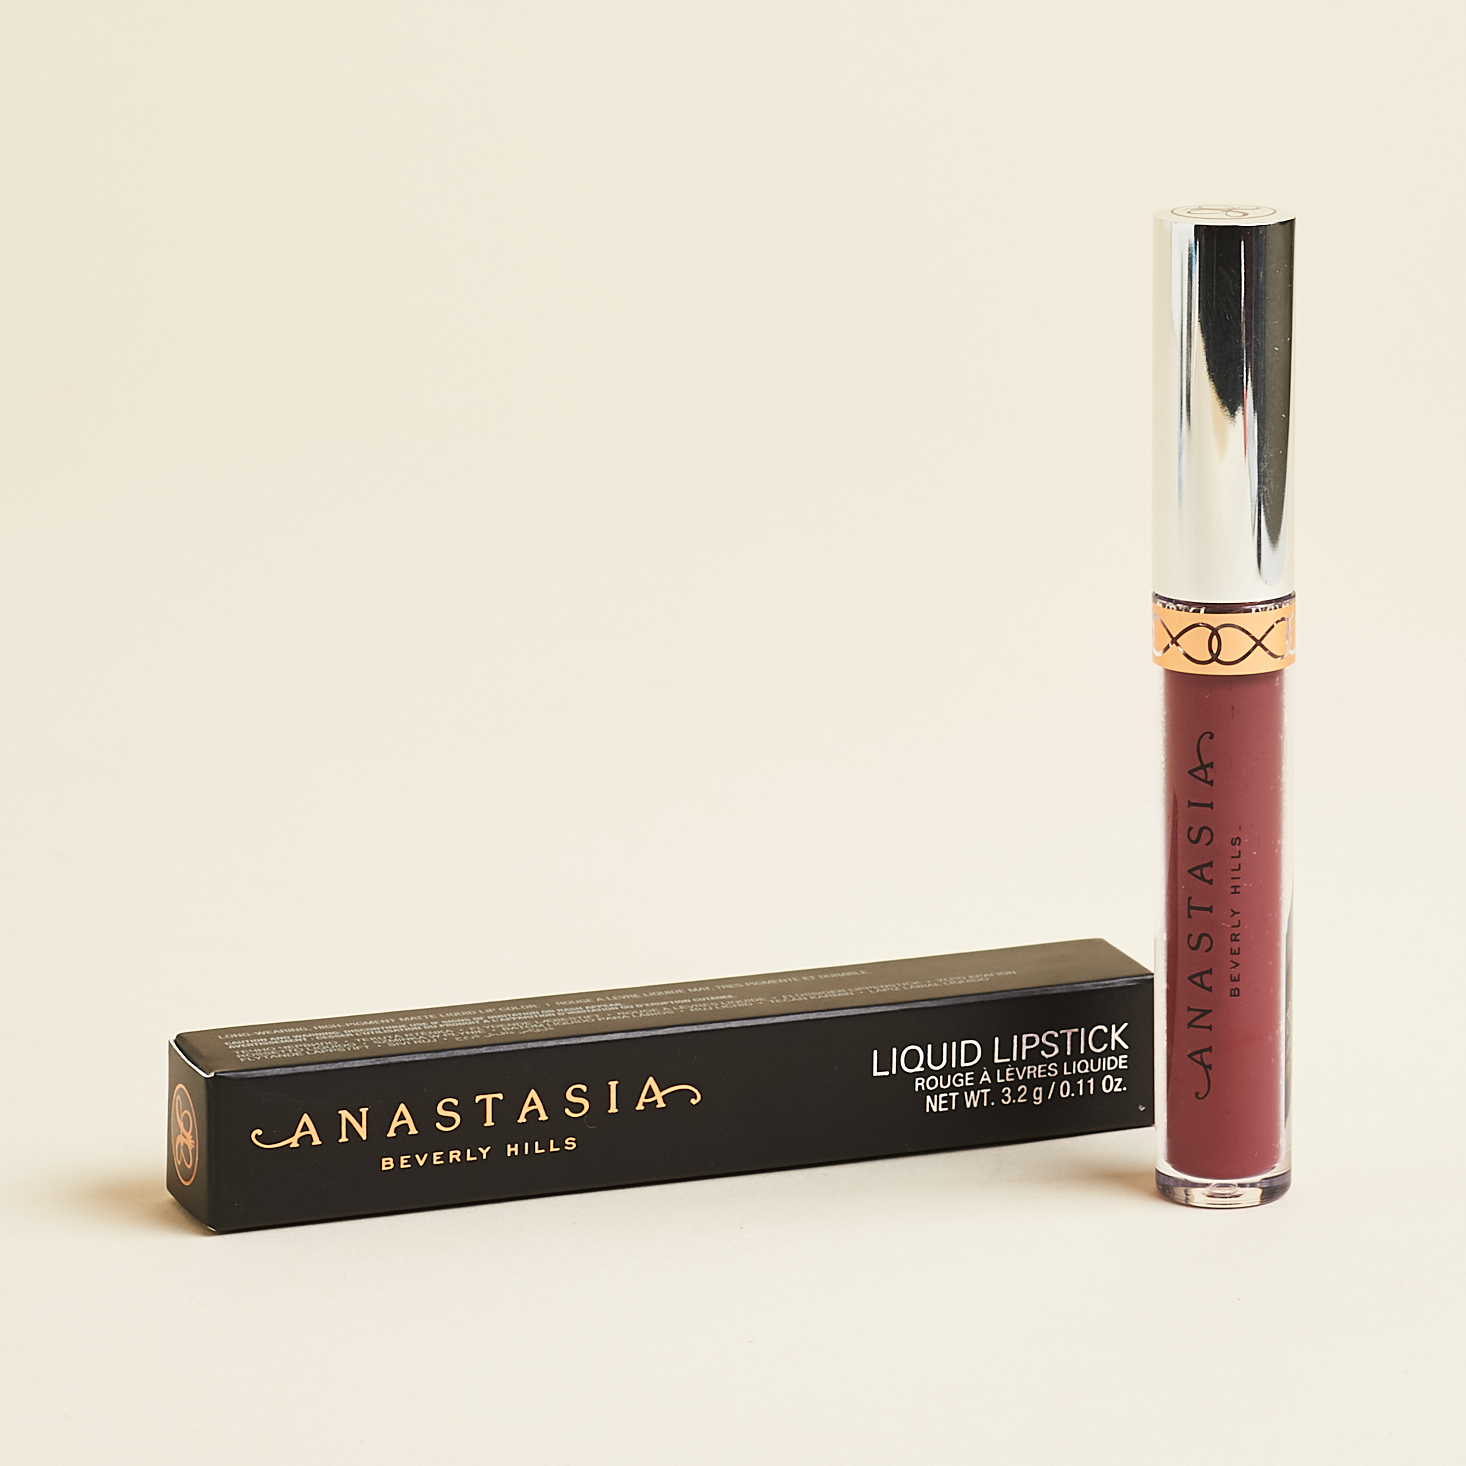 Anatasia Beverly Hills Liquid Lipstick in 'Trust Issues with box